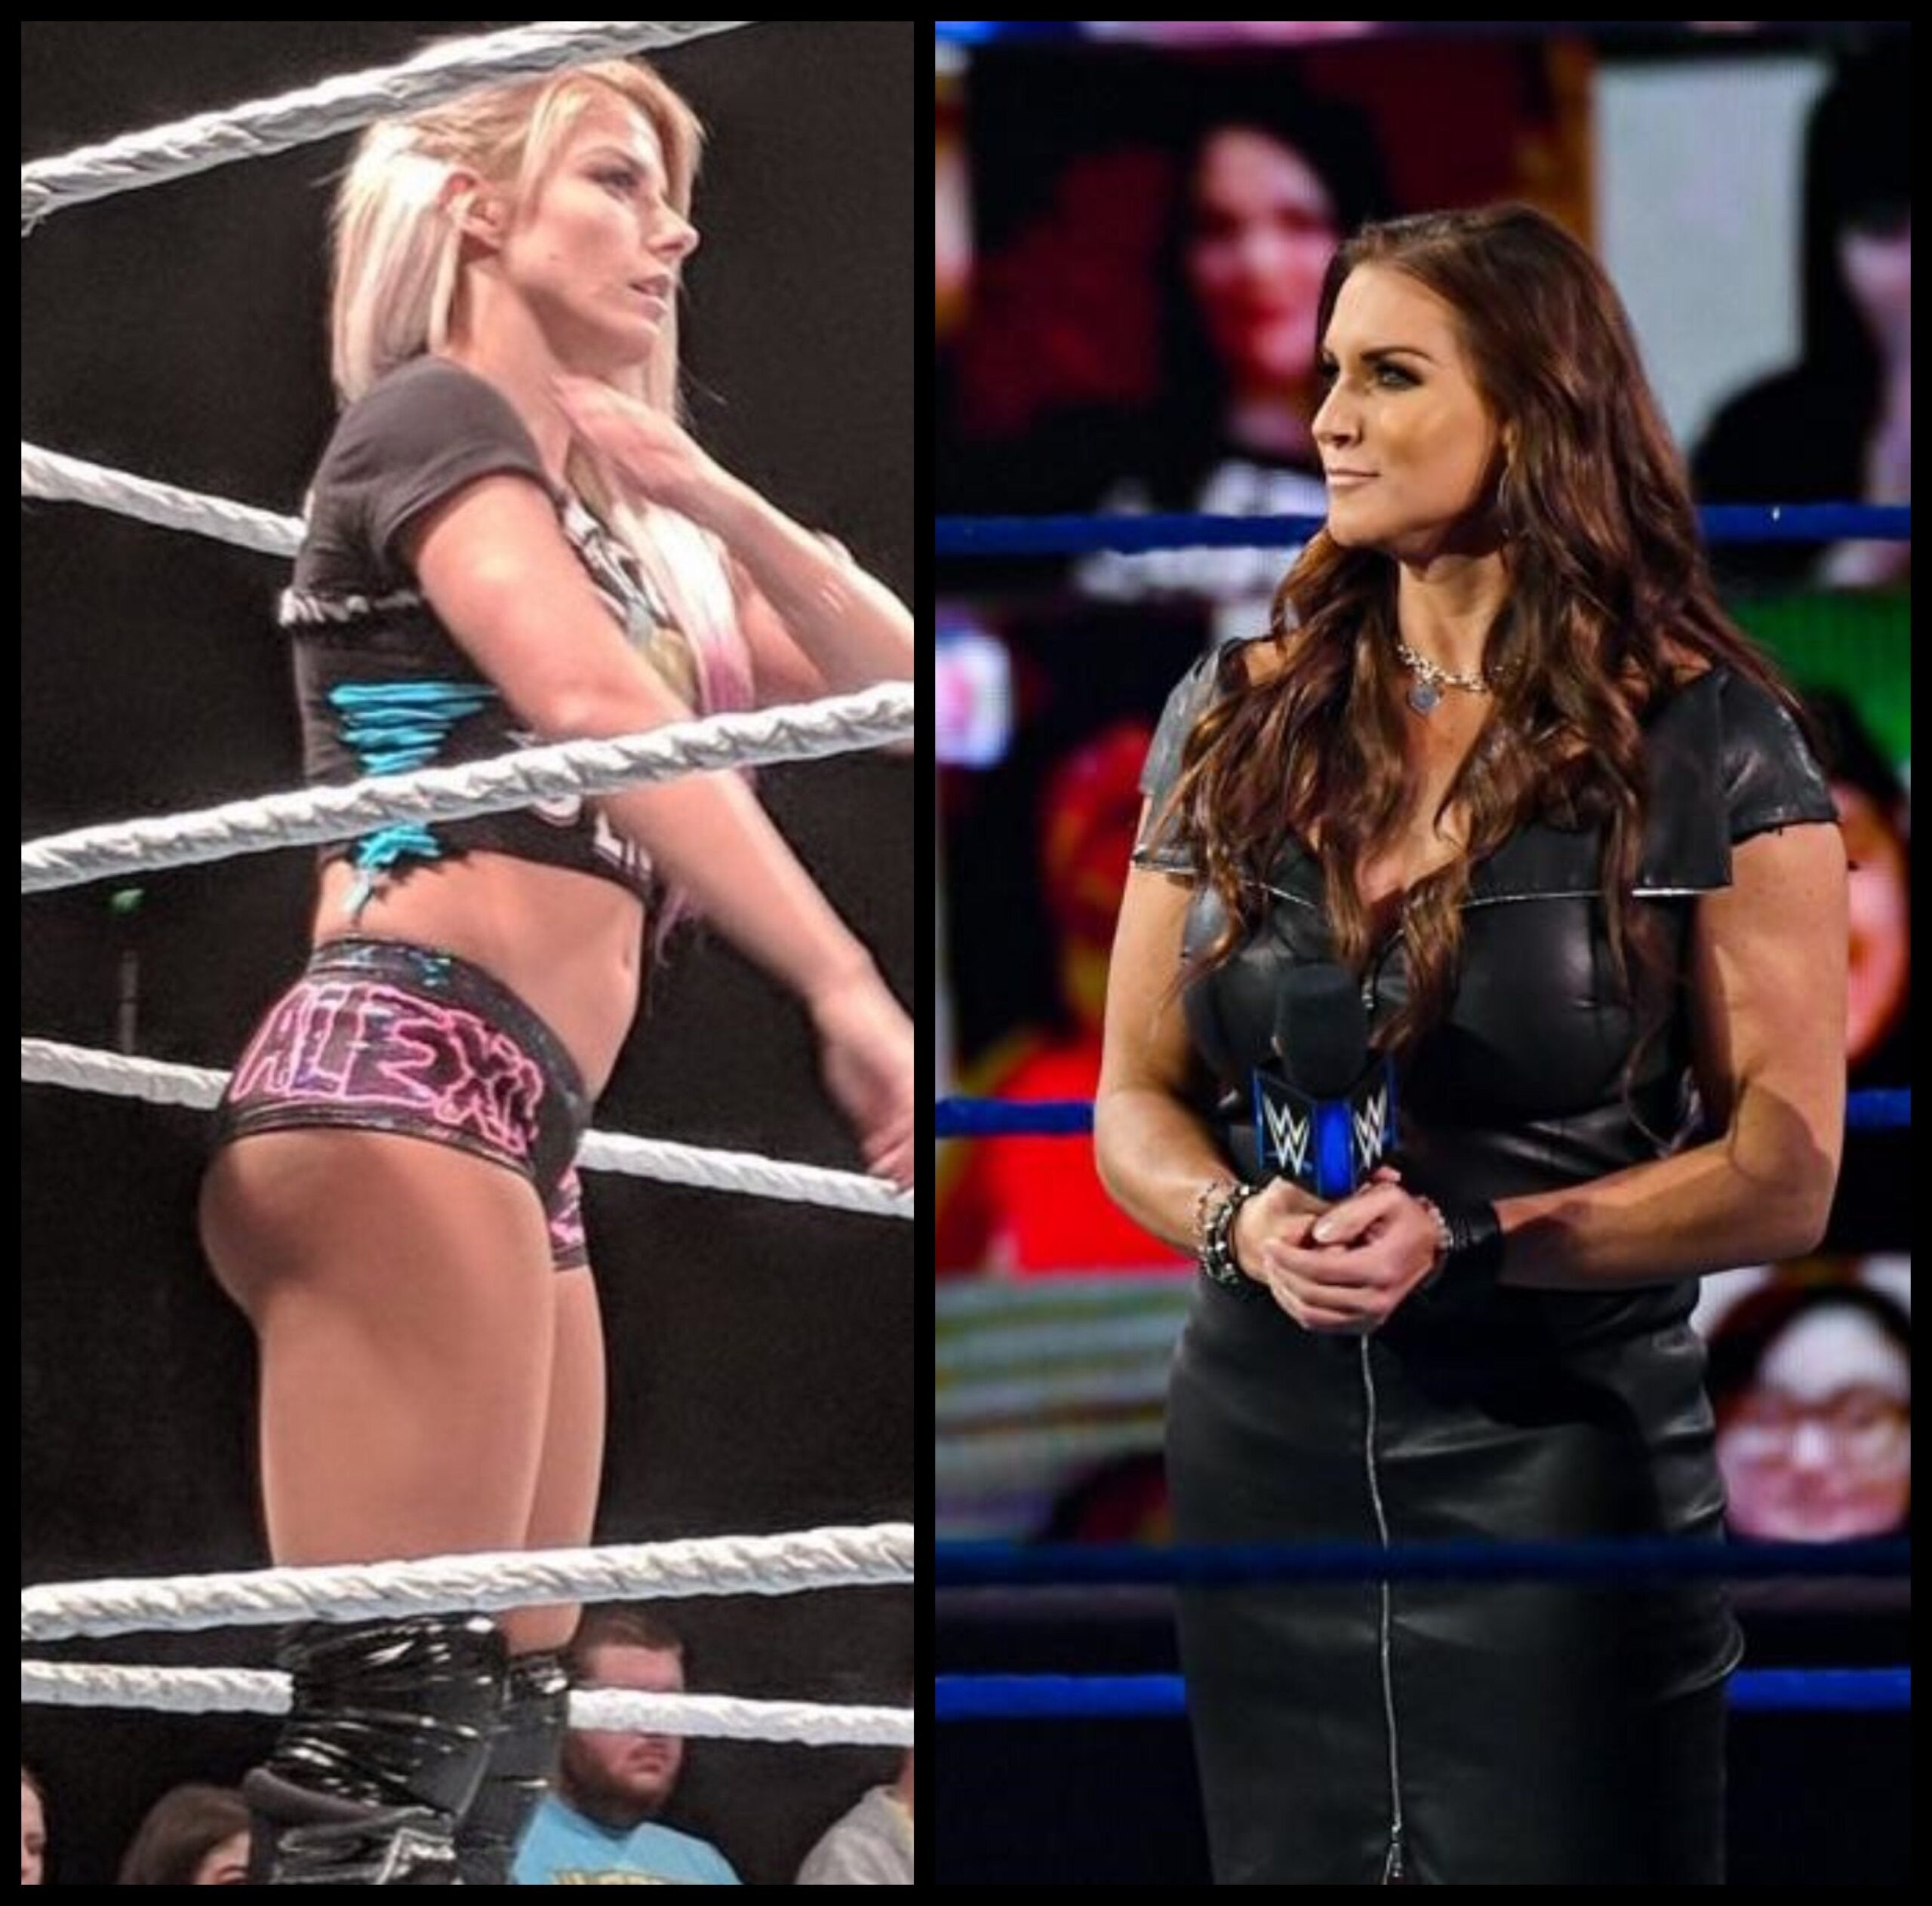 Any wrestling fans here JO to Alexa Bliss and Steph